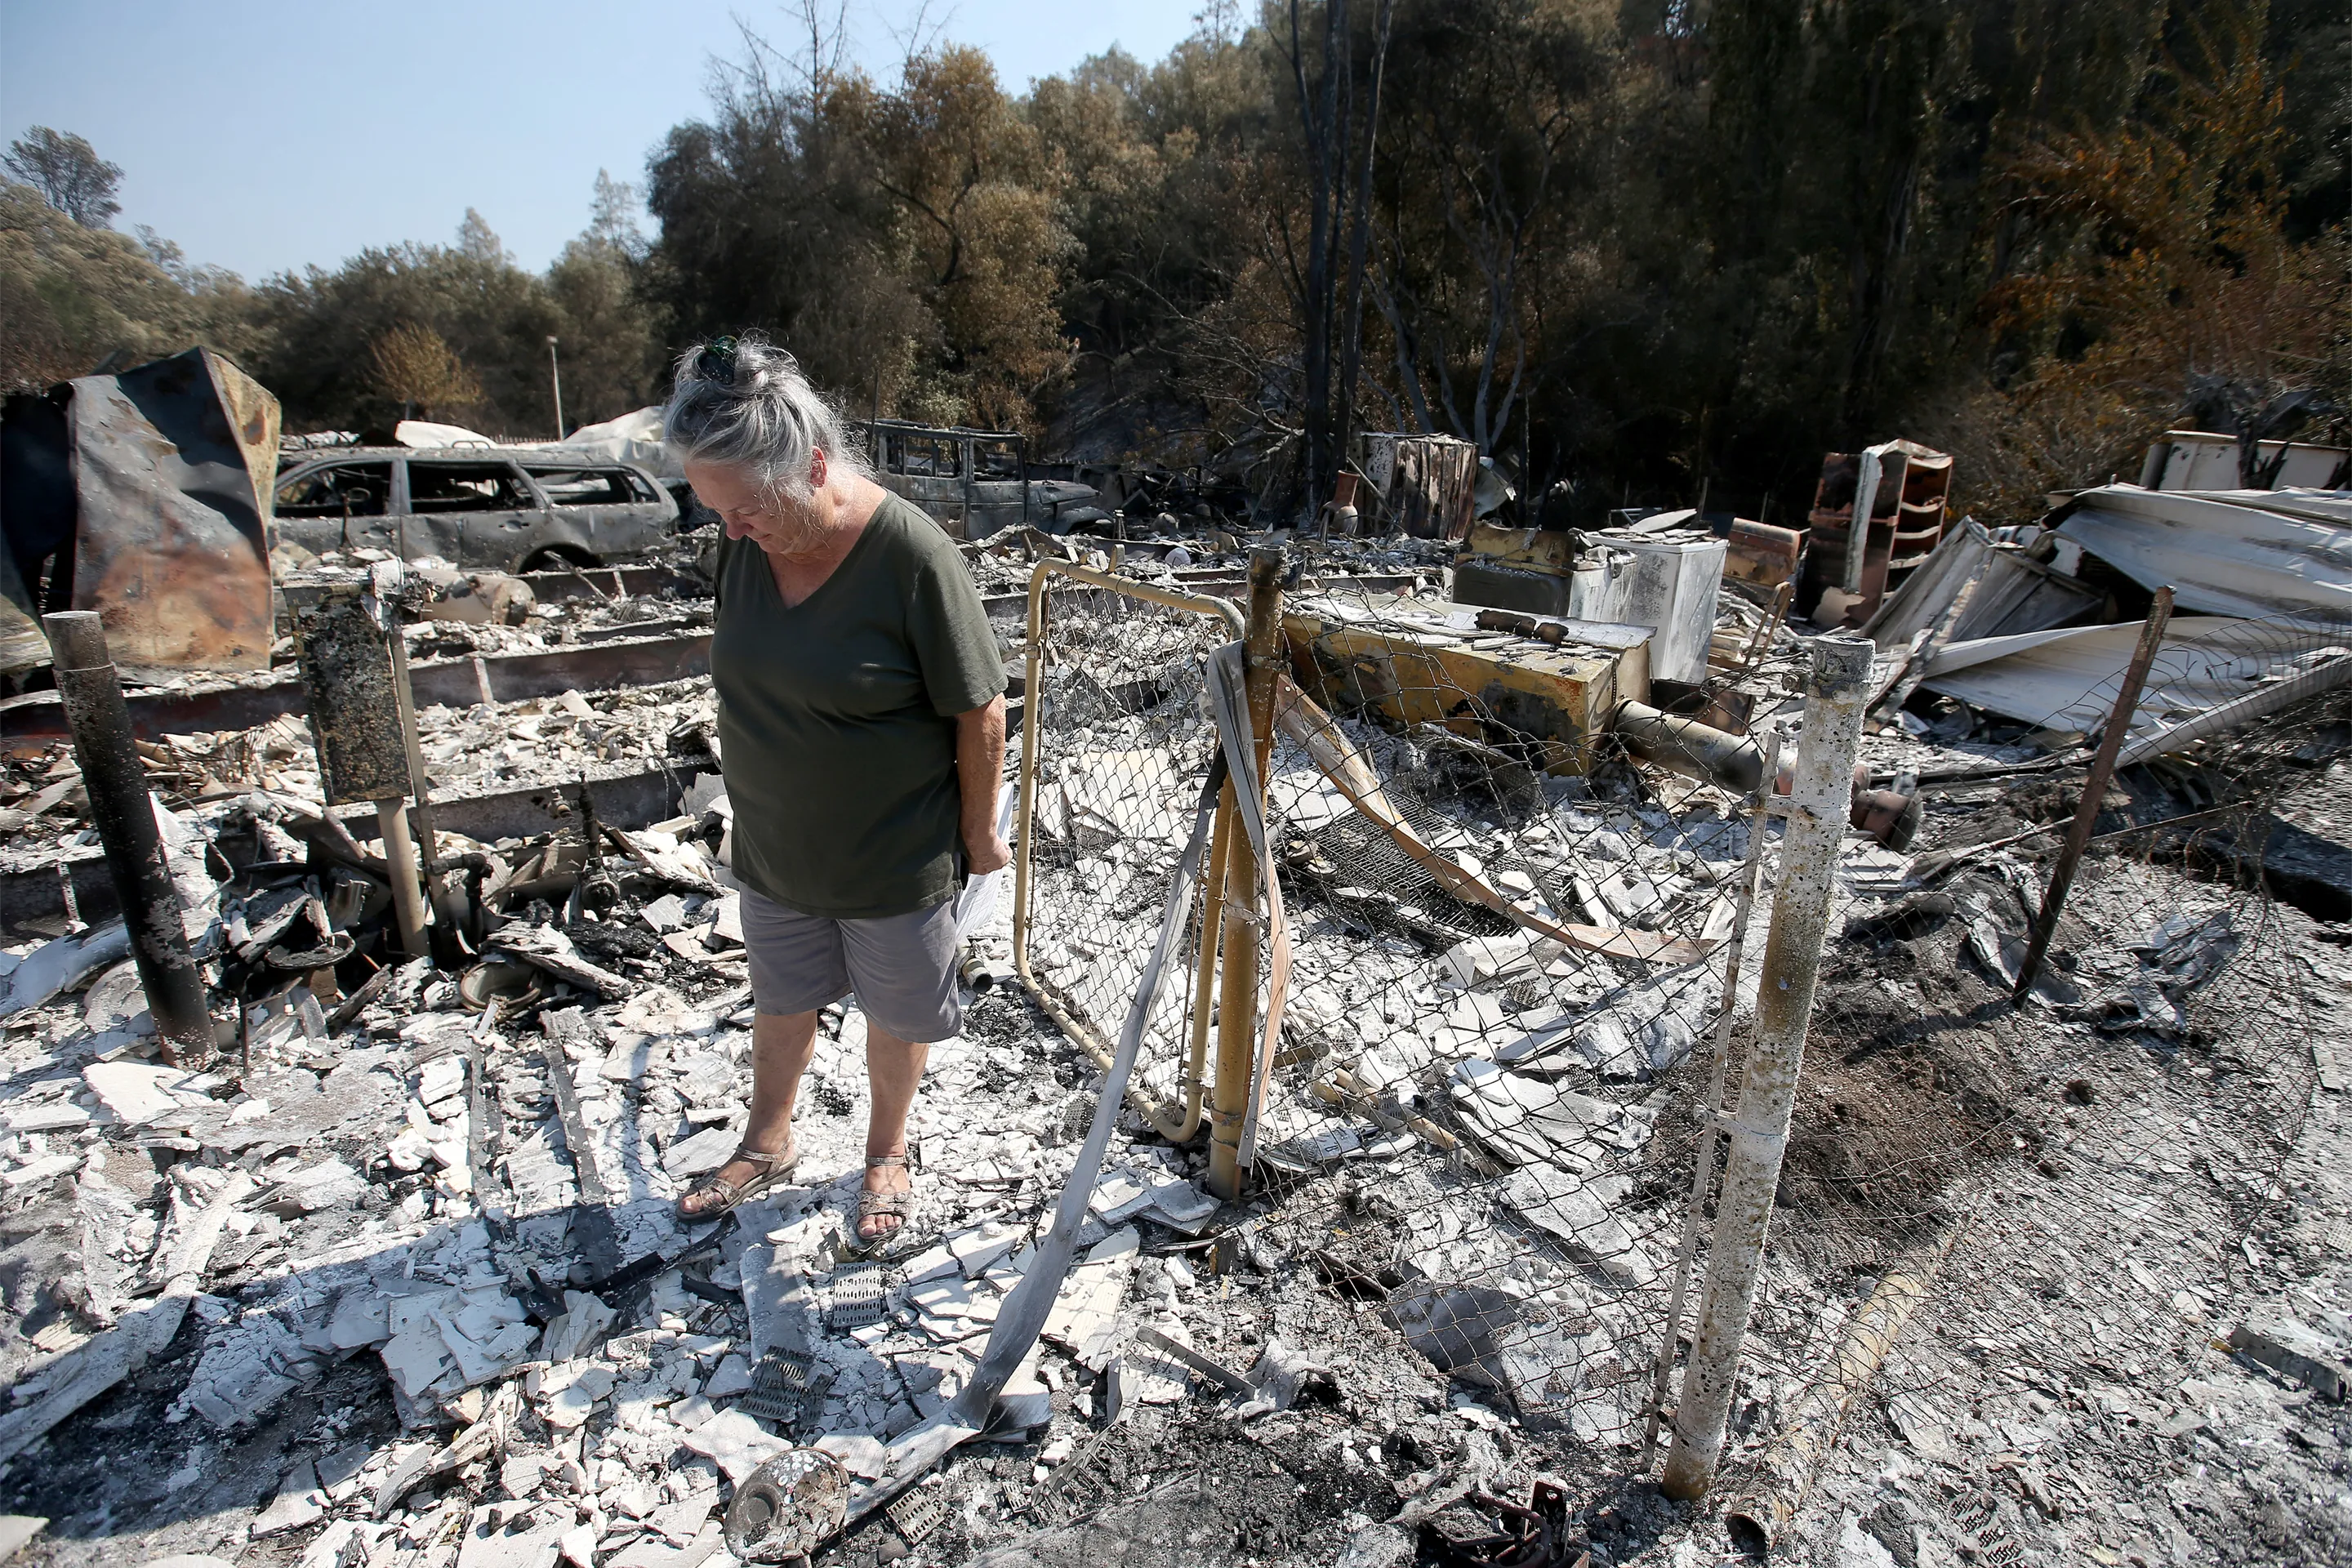 Dealing With Wildfire Damage? These Free Resources Can Help You File Your Insurance Claim